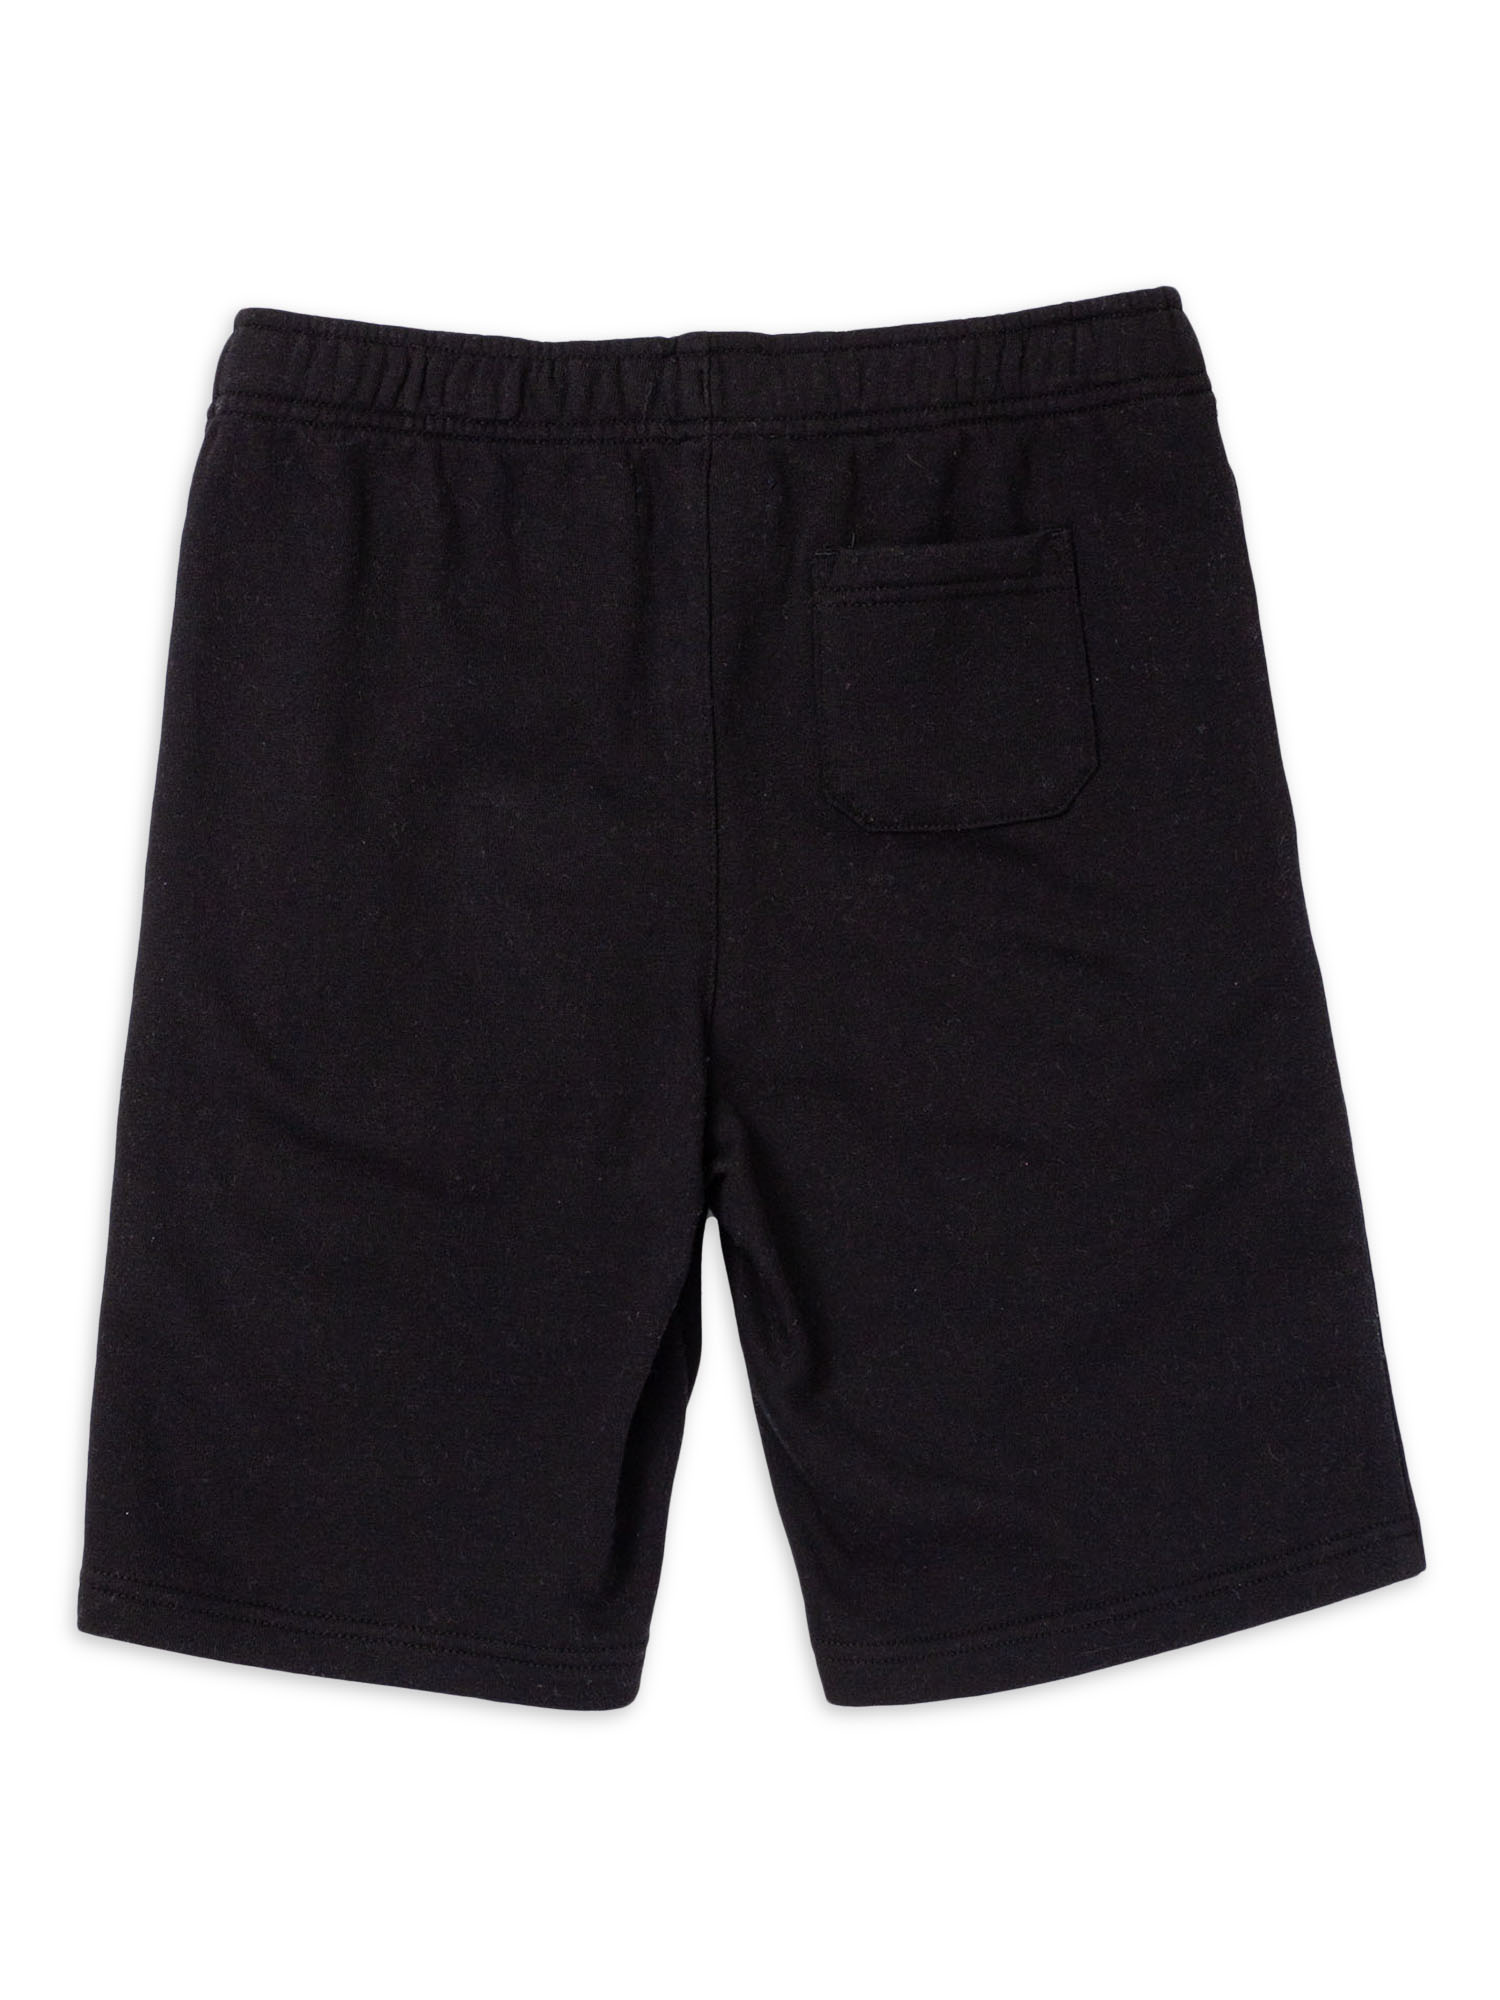 U.S Polo Assn. Performance Fleece 2-Pack Shorts, Sizes 4-18 - image 3 of 5